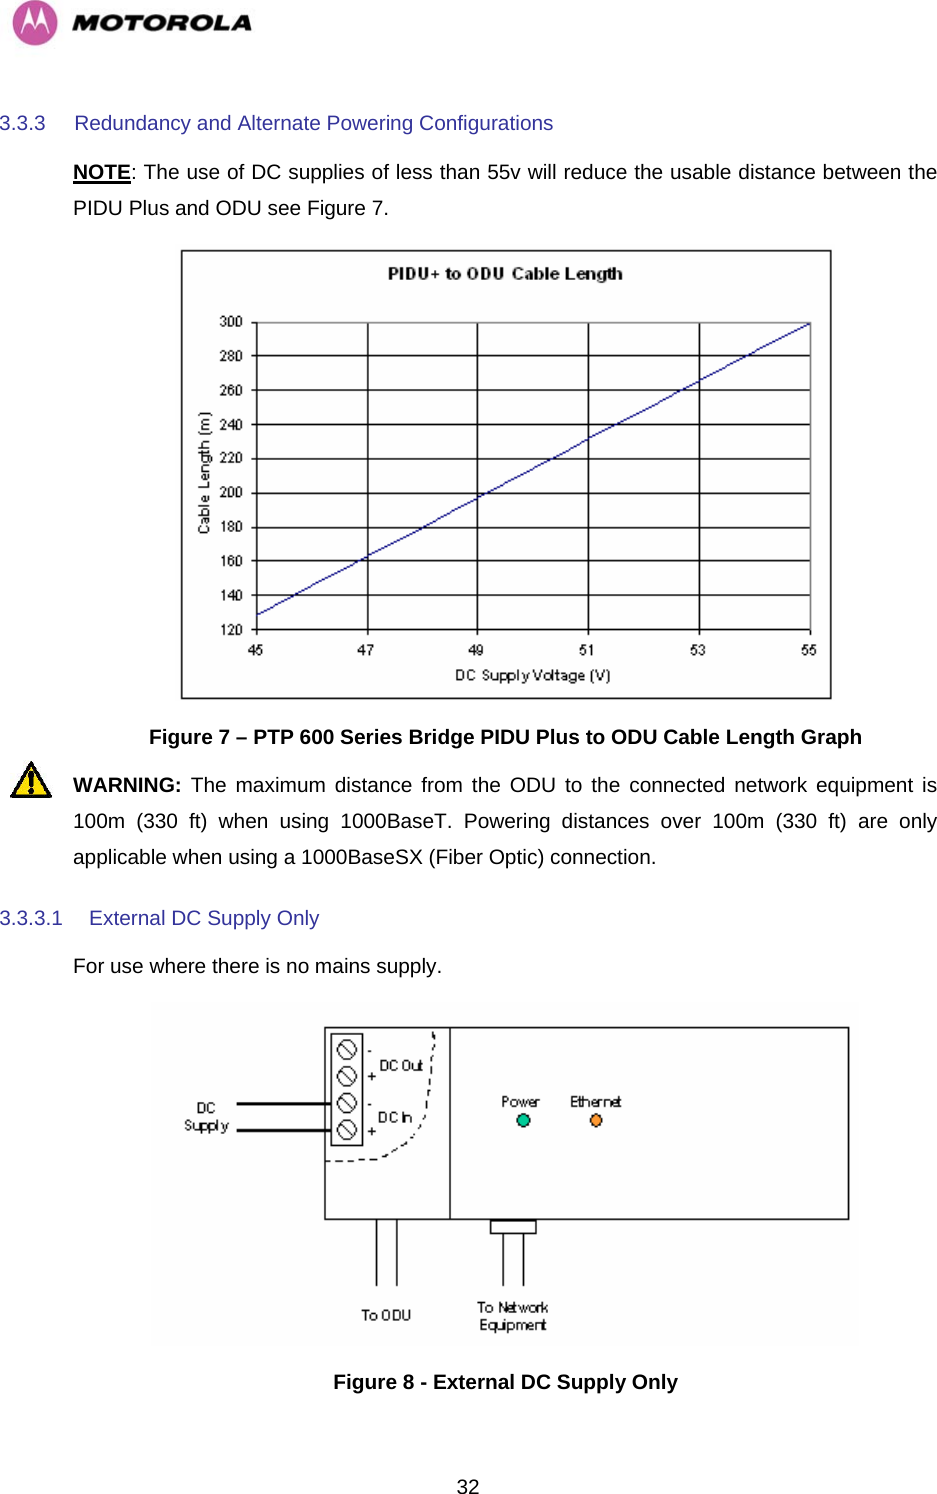   323.3.3  Redundancy and Alternate Powering Configurations NOTE: The use of DC supplies of less than 55v will reduce the usable distance between the PIDU Plus and ODU see Figure 7.  Figure 7 – PTP 600 Series Bridge PIDU Plus to ODU Cable Length Graph WARNING: The maximum distance from the ODU to the connected network equipment is 100m (330 ft) when using 1000BaseT. Powering distances over 100m (330 ft) are only applicable when using a 1000BaseSX (Fiber Optic) connection. 3.3.3.1  External DC Supply Only For use where there is no mains supply.  Figure 8 - External DC Supply Only 